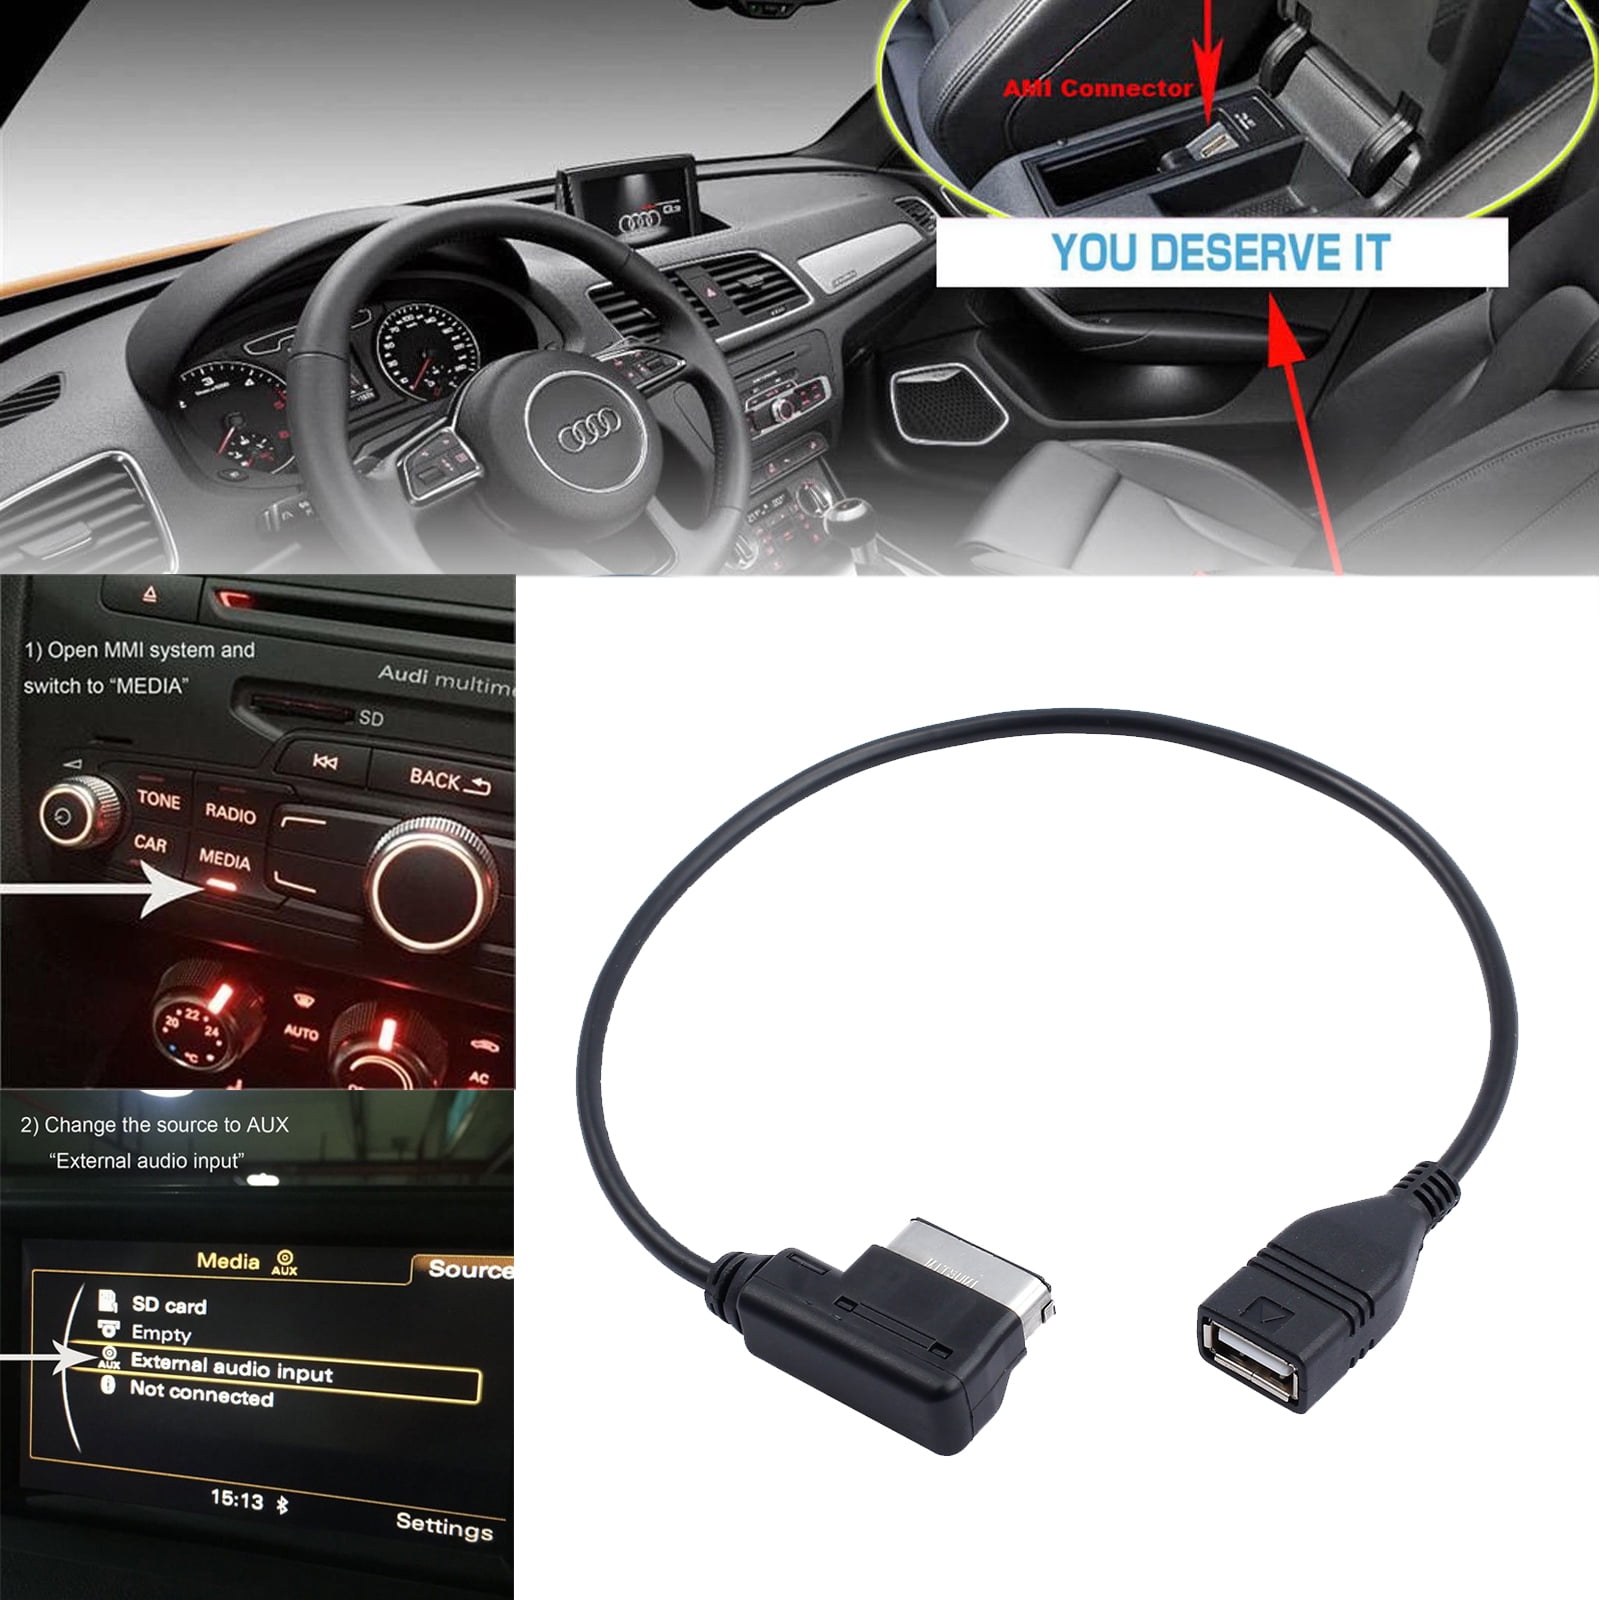 For Audi VW Skoda AMI MMI MDI Interface AUX Stereo Music USB Cable Adapter Cord 